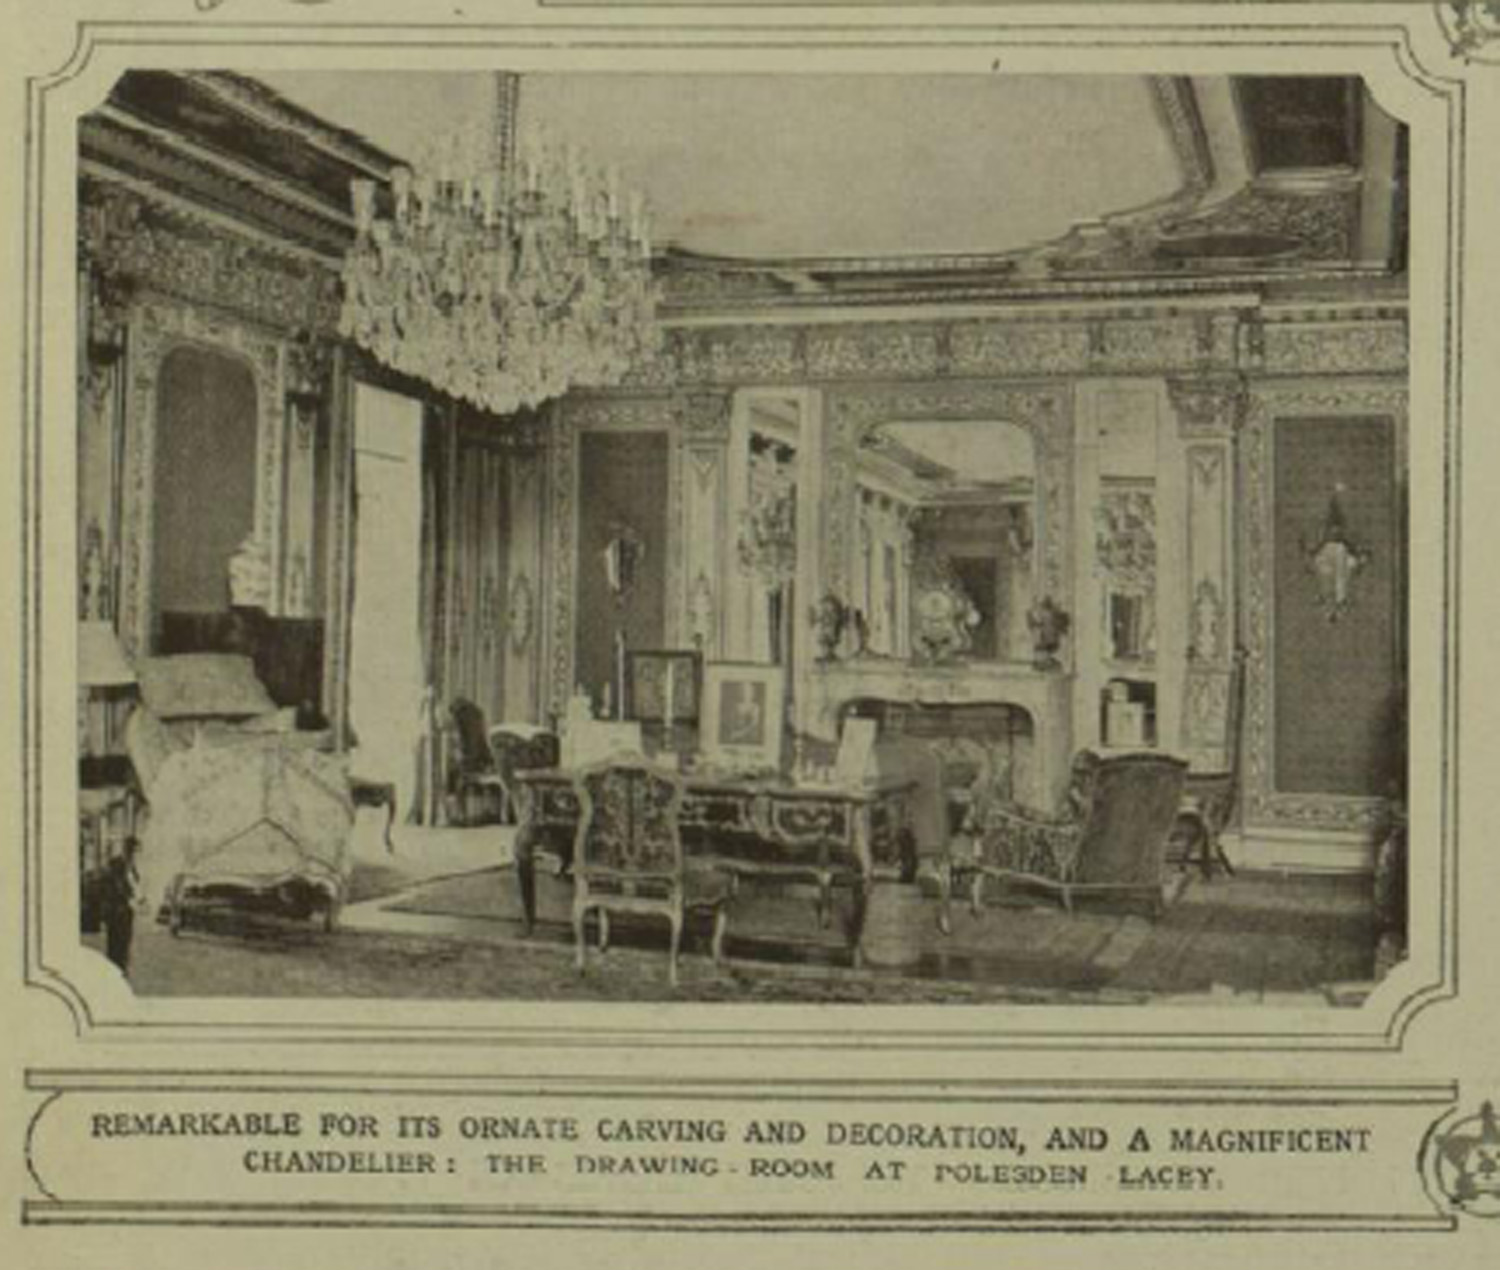 drawing room wiki on File Drawing Room Polesden Lacey 1923 Jpg   Wikipedia  The Free